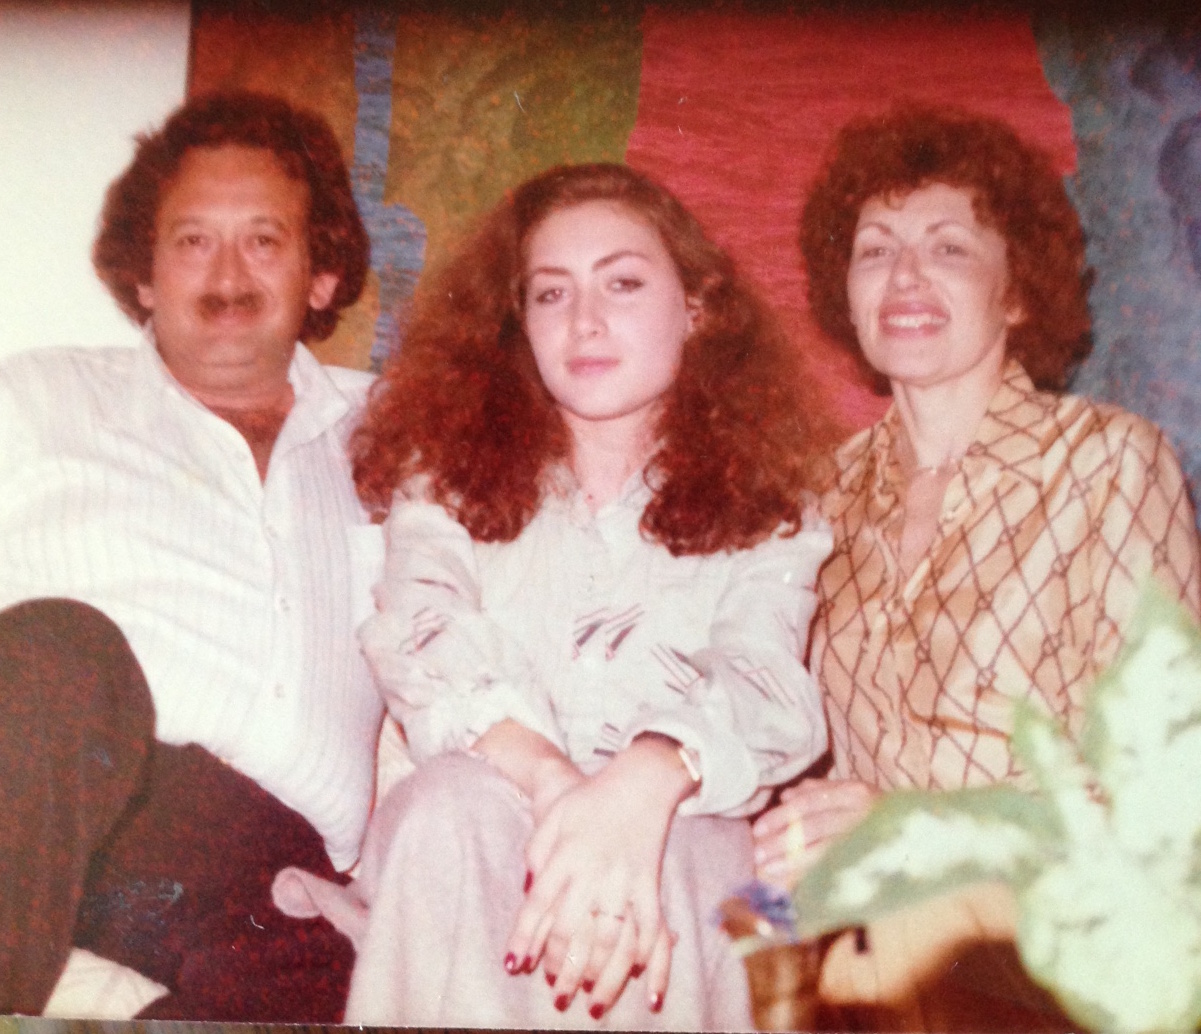 The author, with her mother and father in the 1970s. (Courtesy of Annabelle Gurwitch)